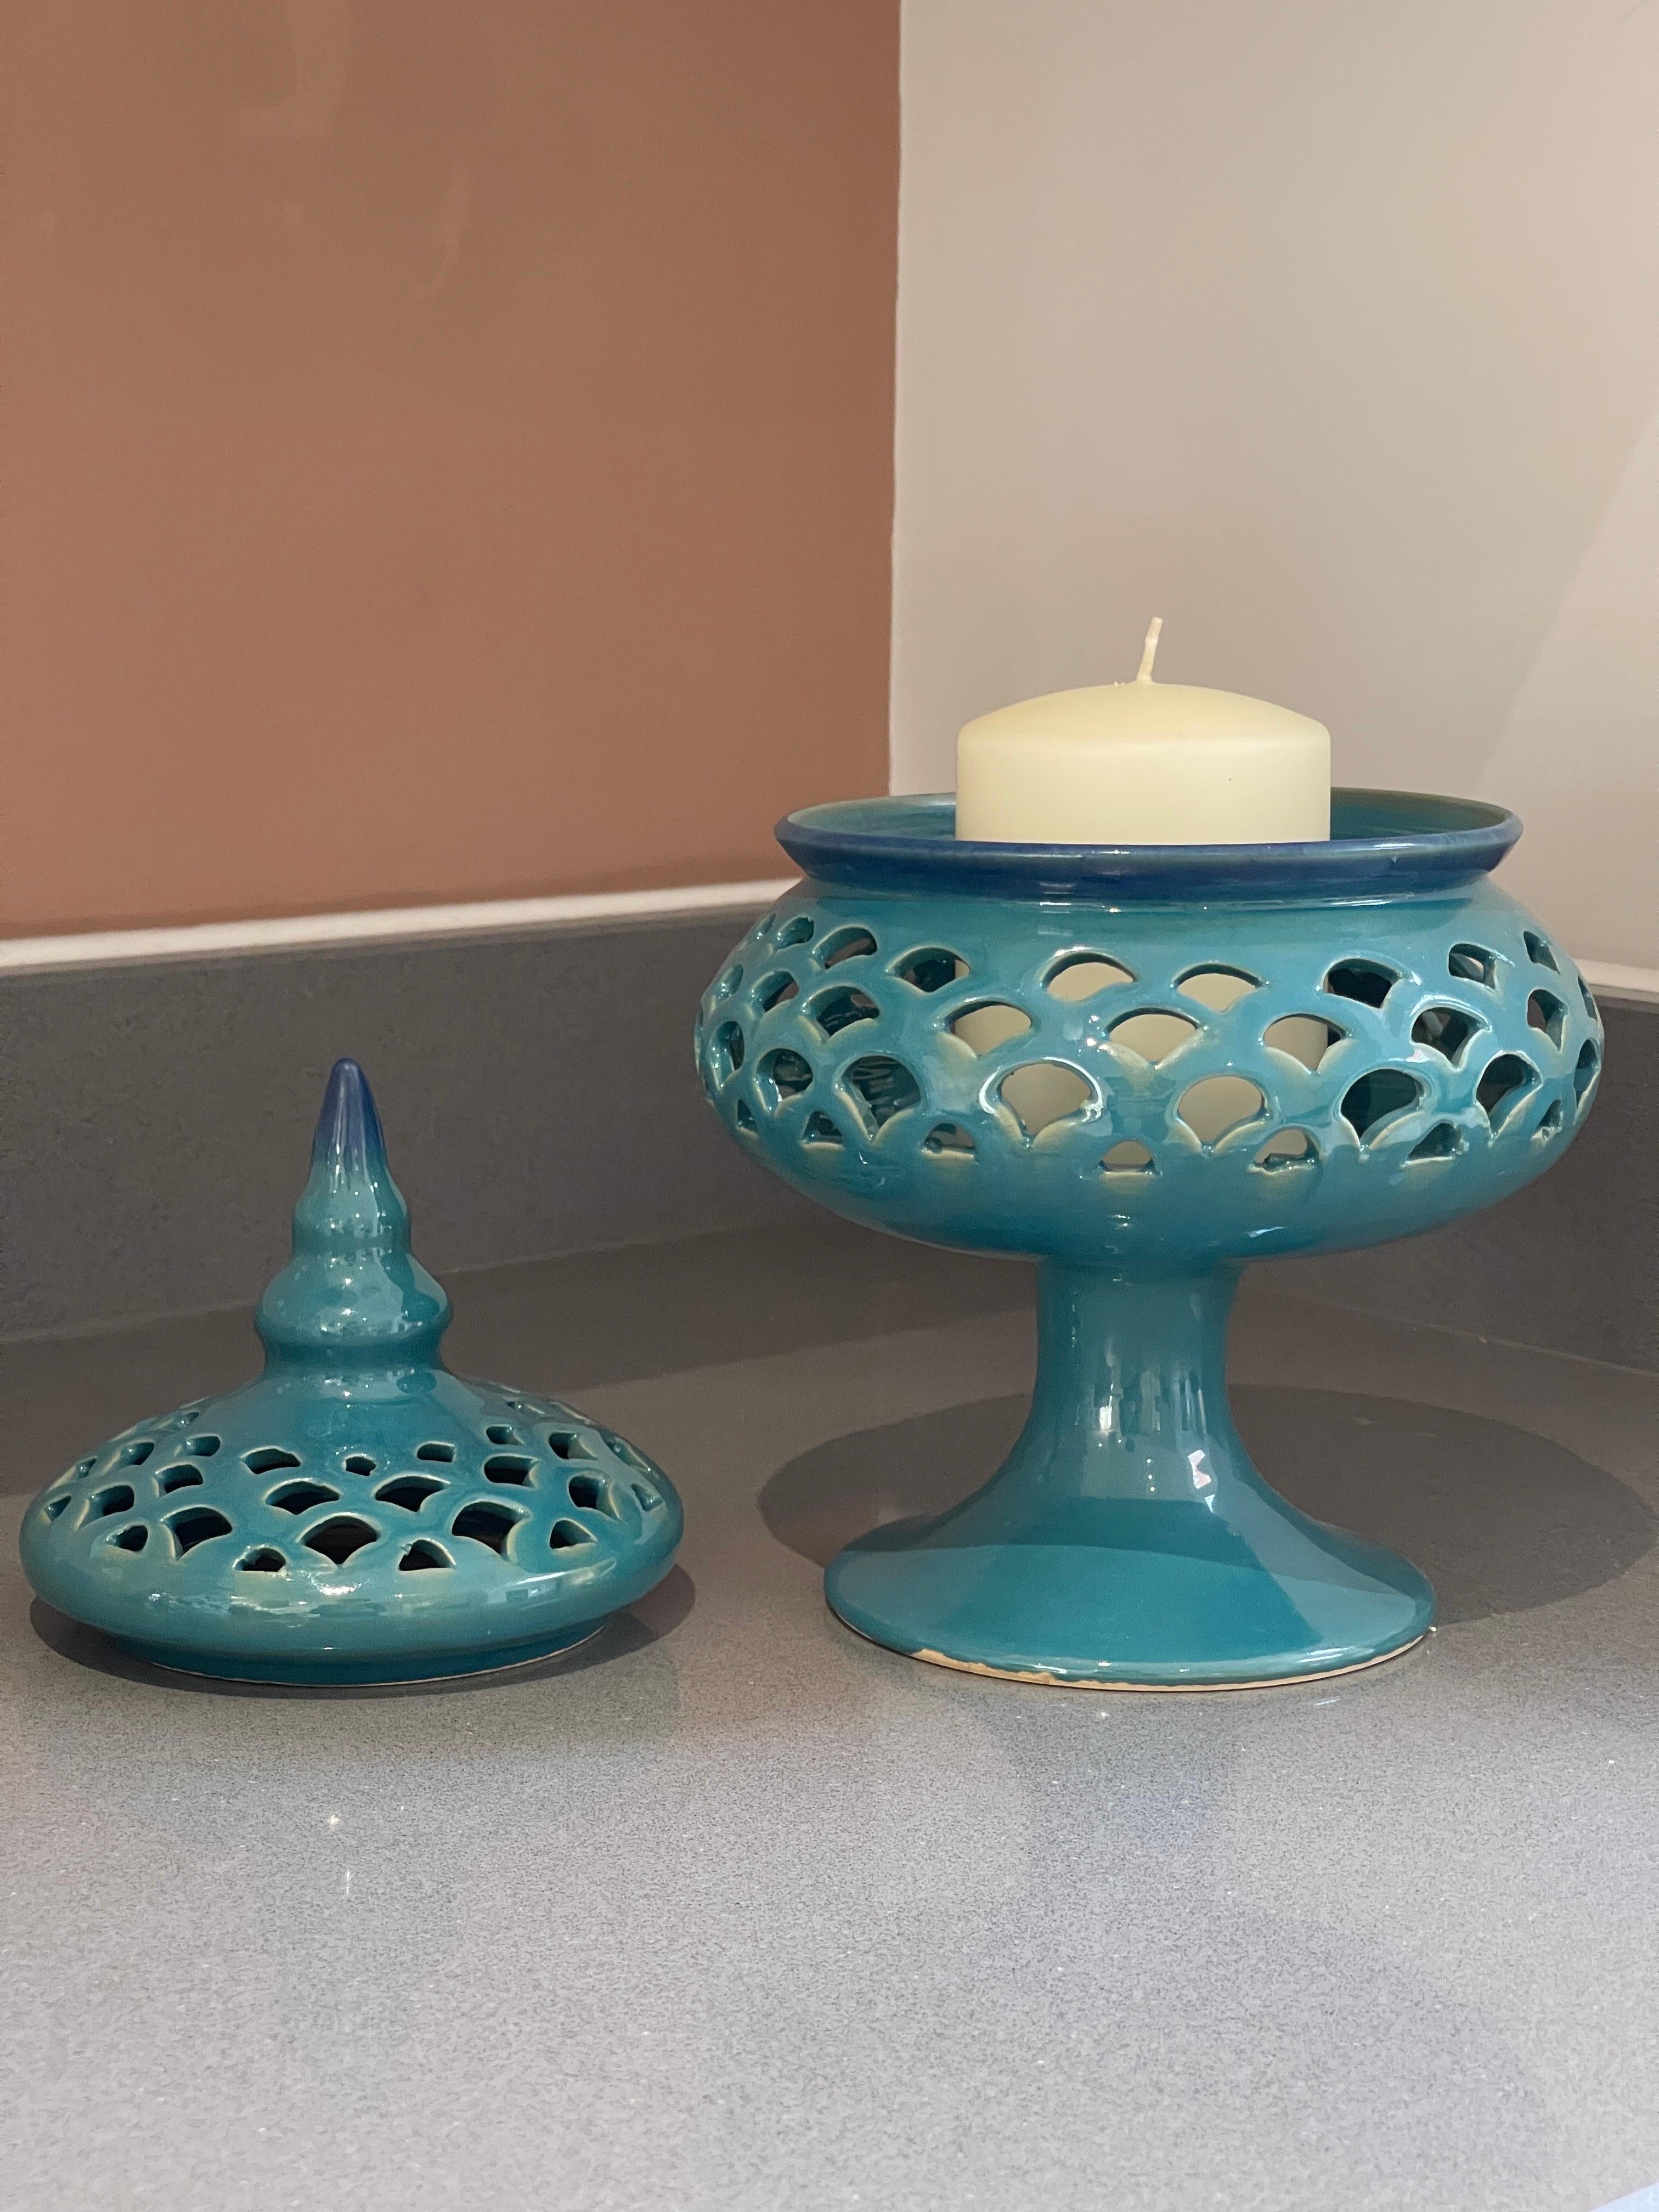 Candle Holder Hand Crafted Blue Ceramic Torches With Stand &Lid In Excellent Condition For Sale In Hampshire, GB